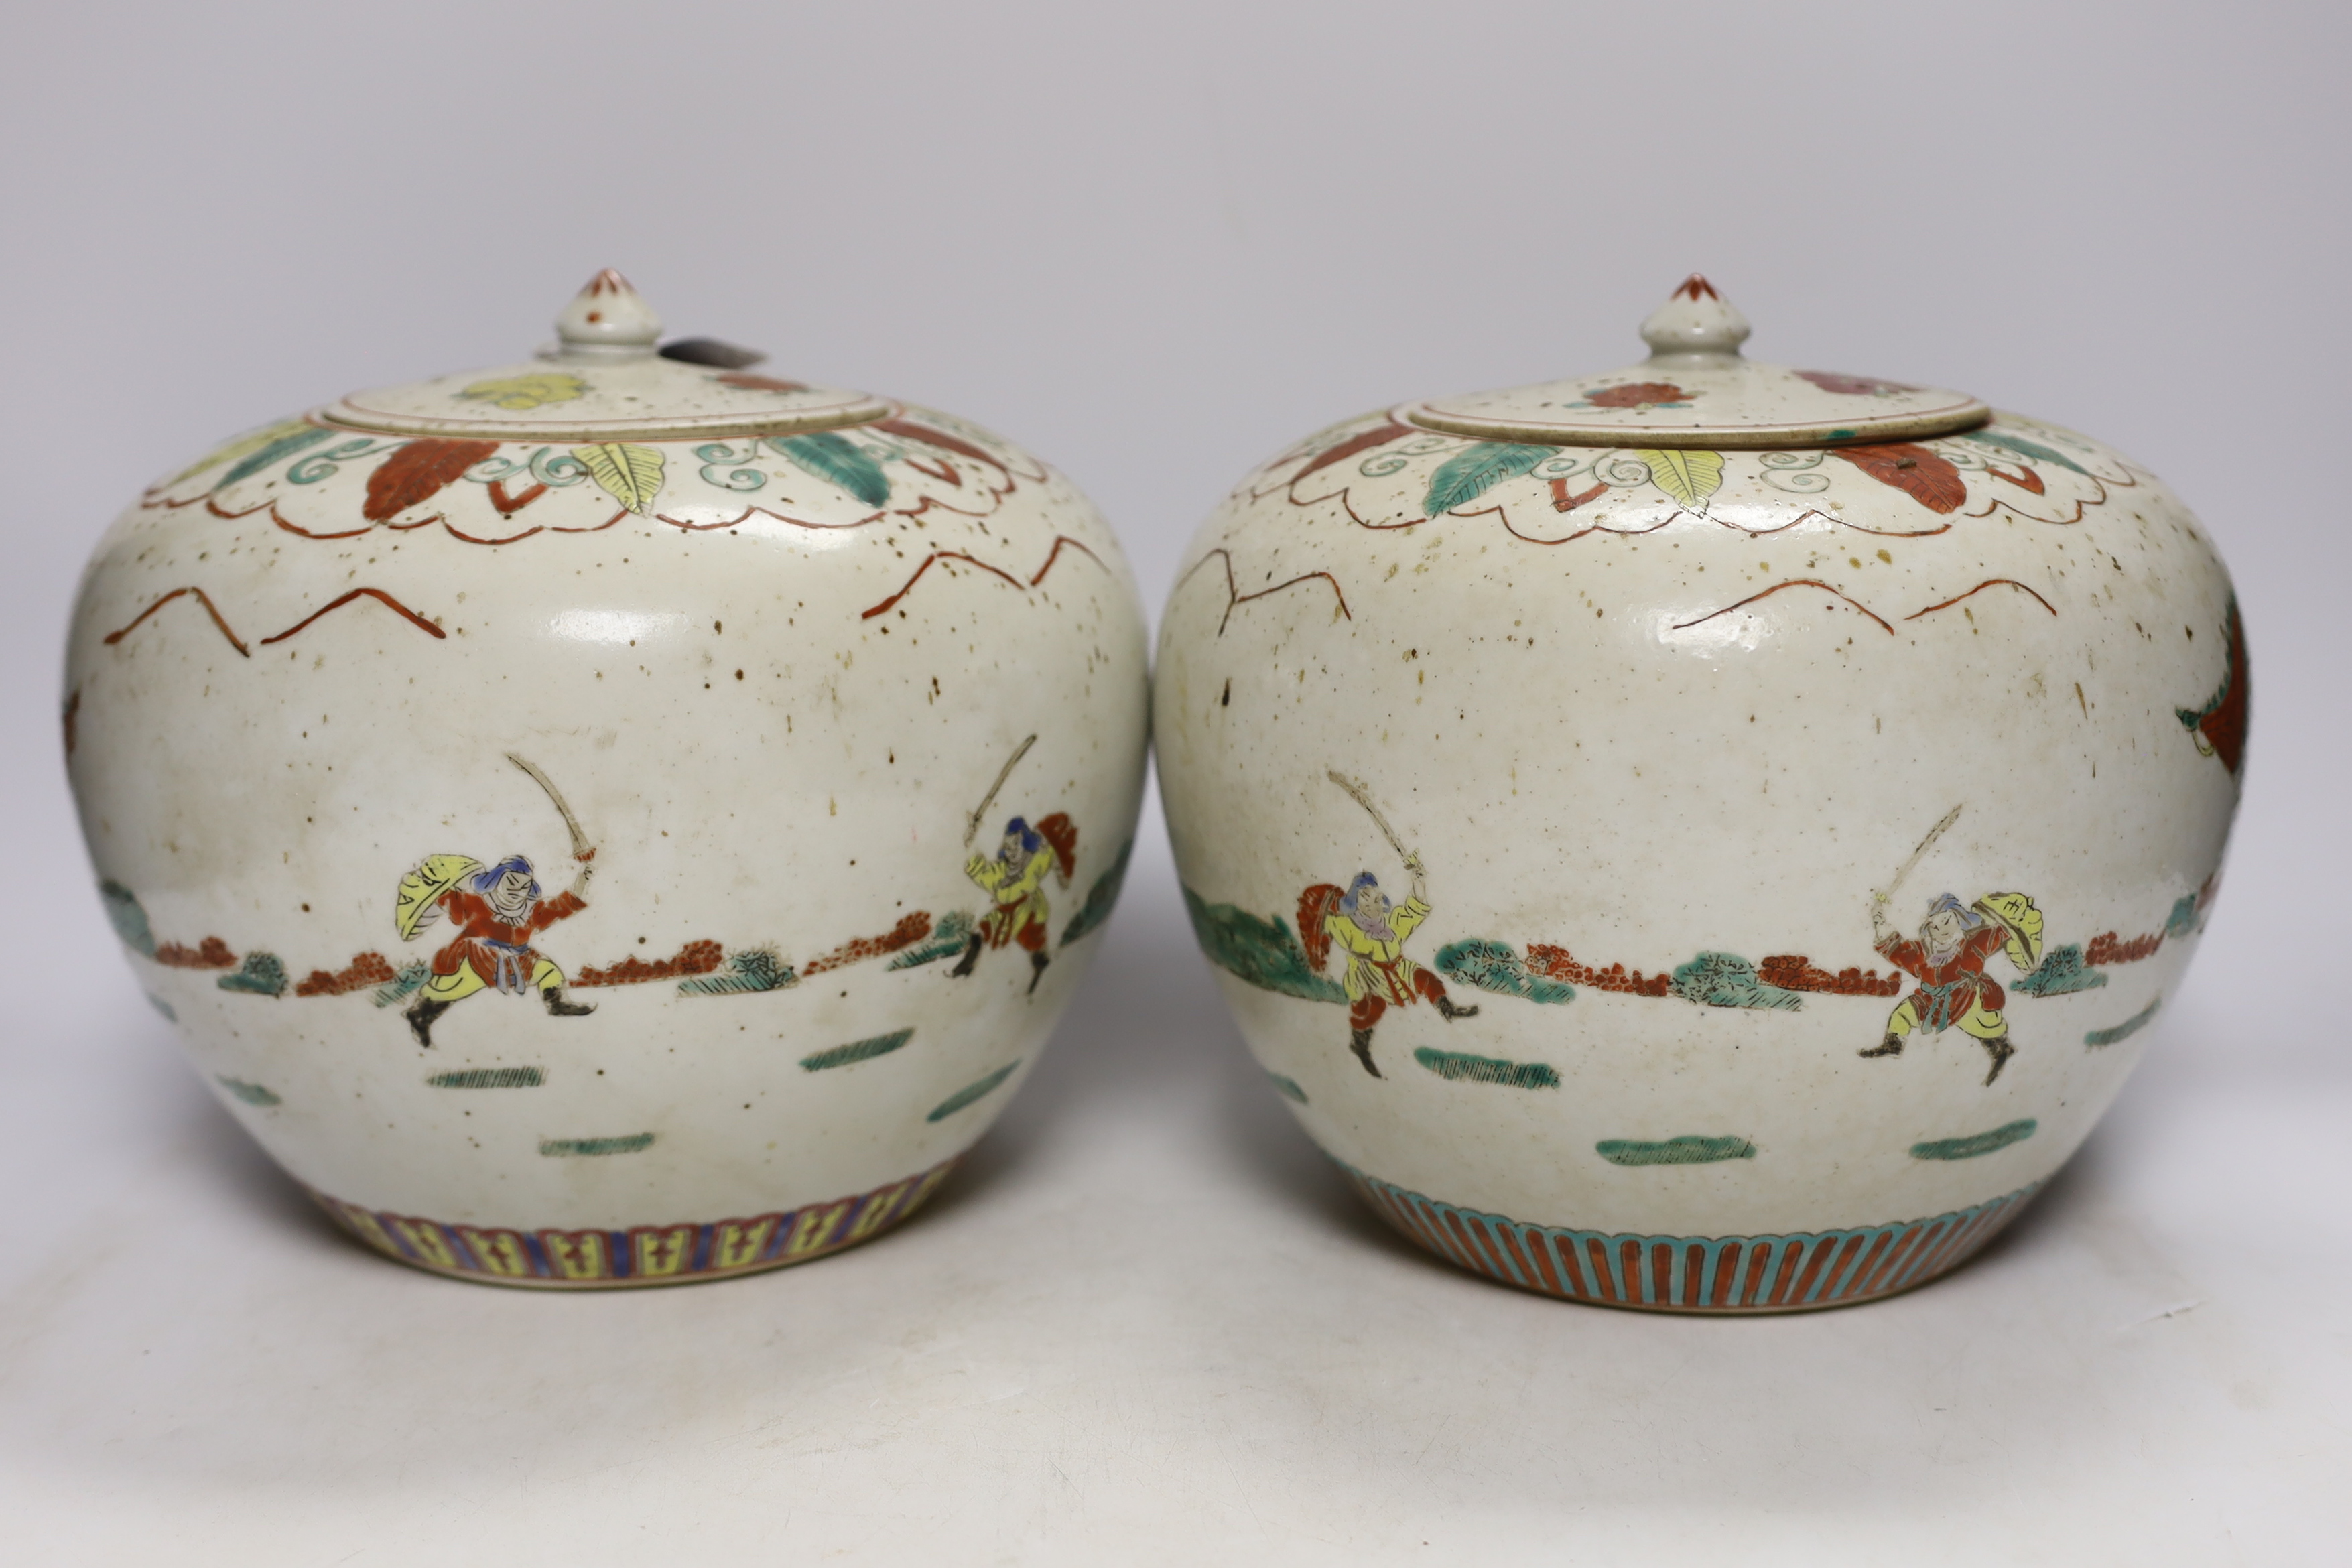 A pair of Chinese famille rose jars and covers